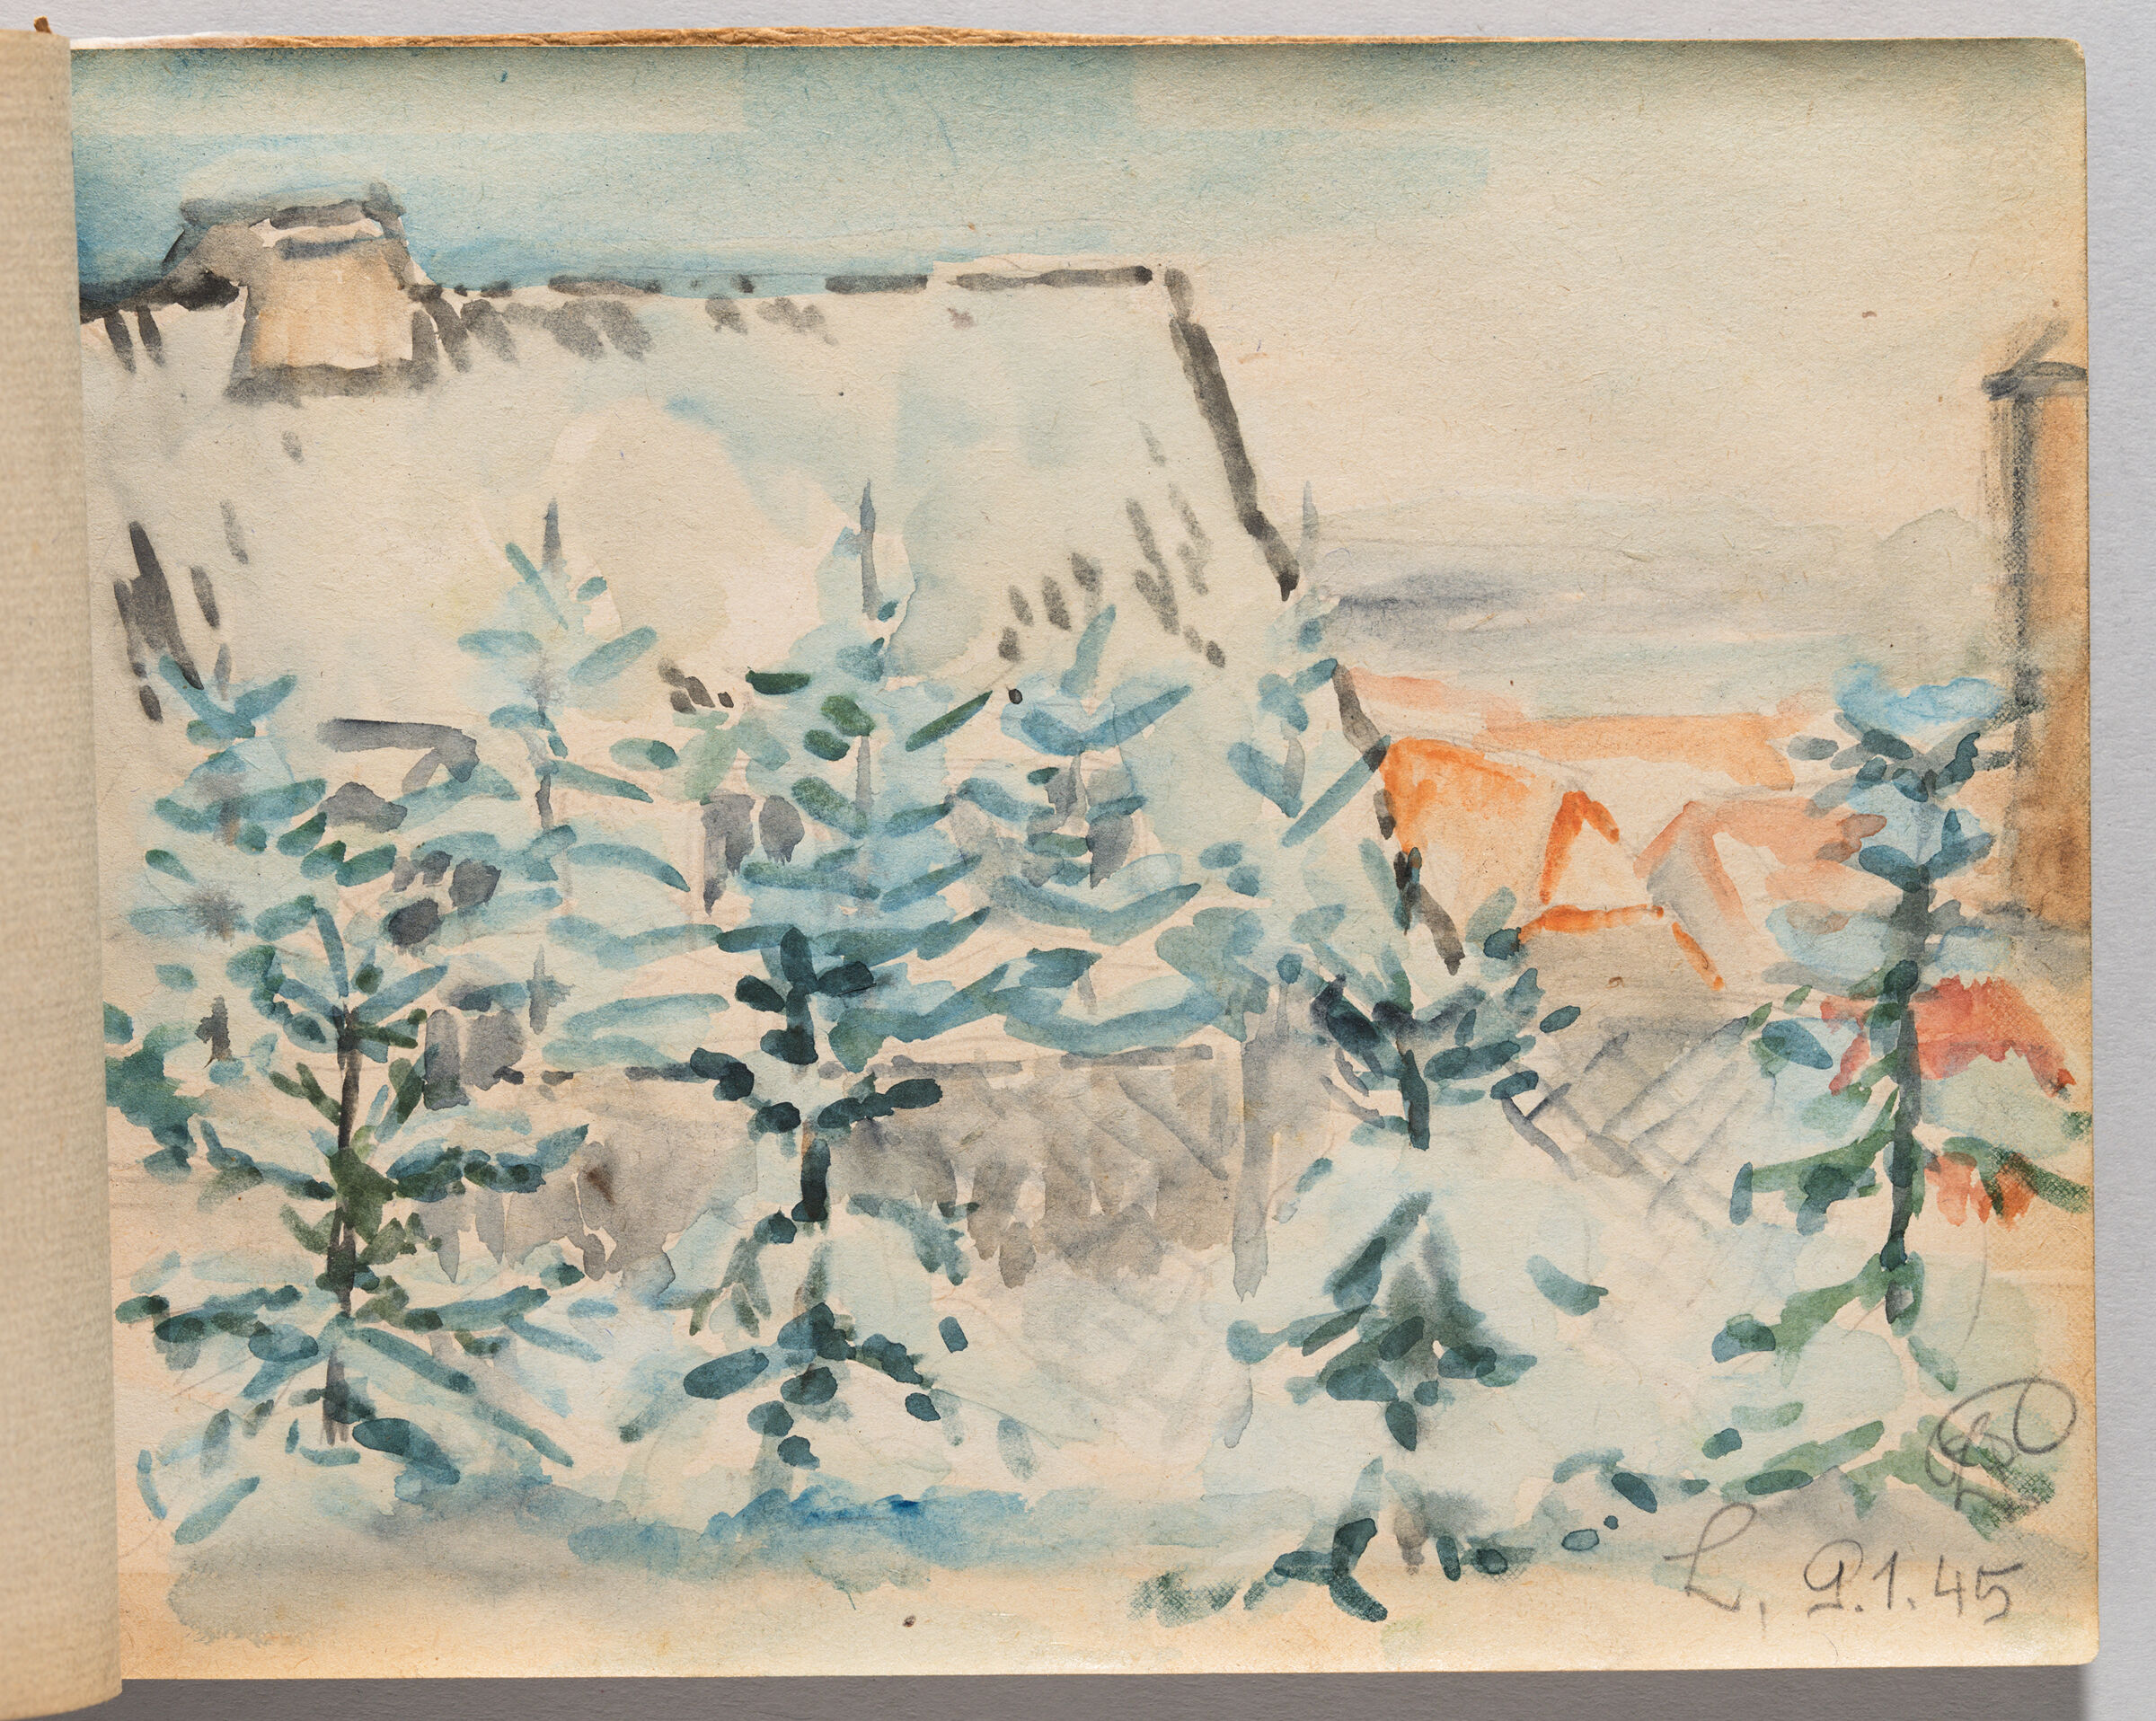 Untitled (Blank, Left Page); Untitled (Houses In Snow, Right Page)